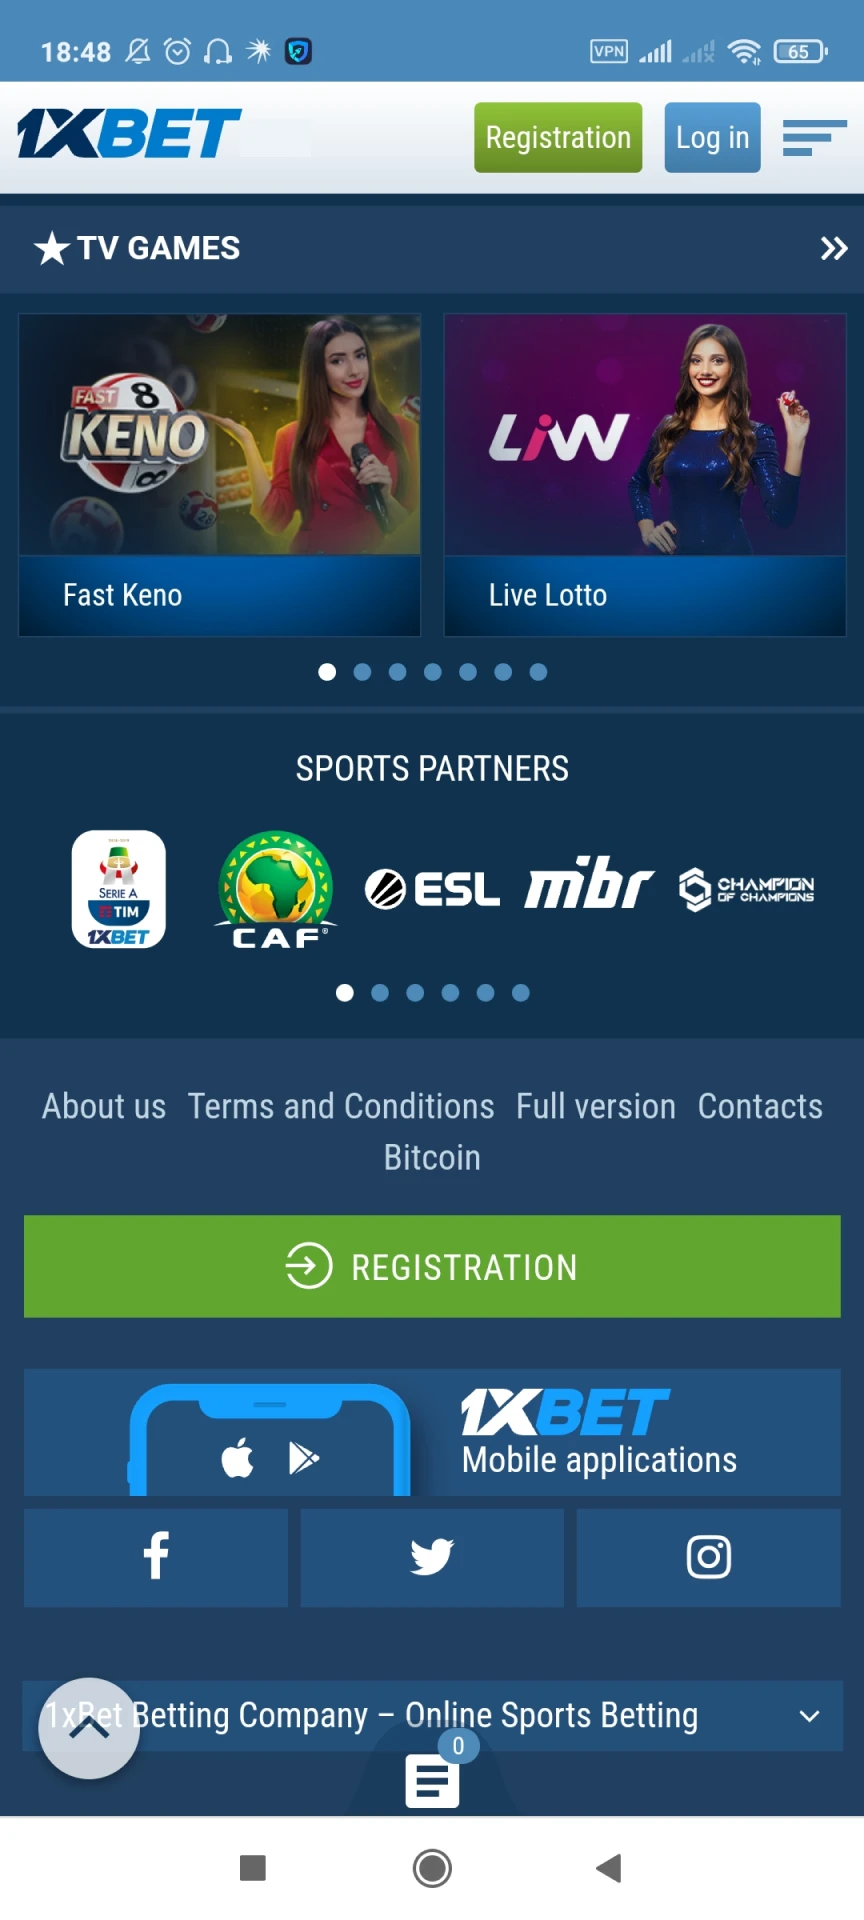 Find the 1xbet app to download on Android.